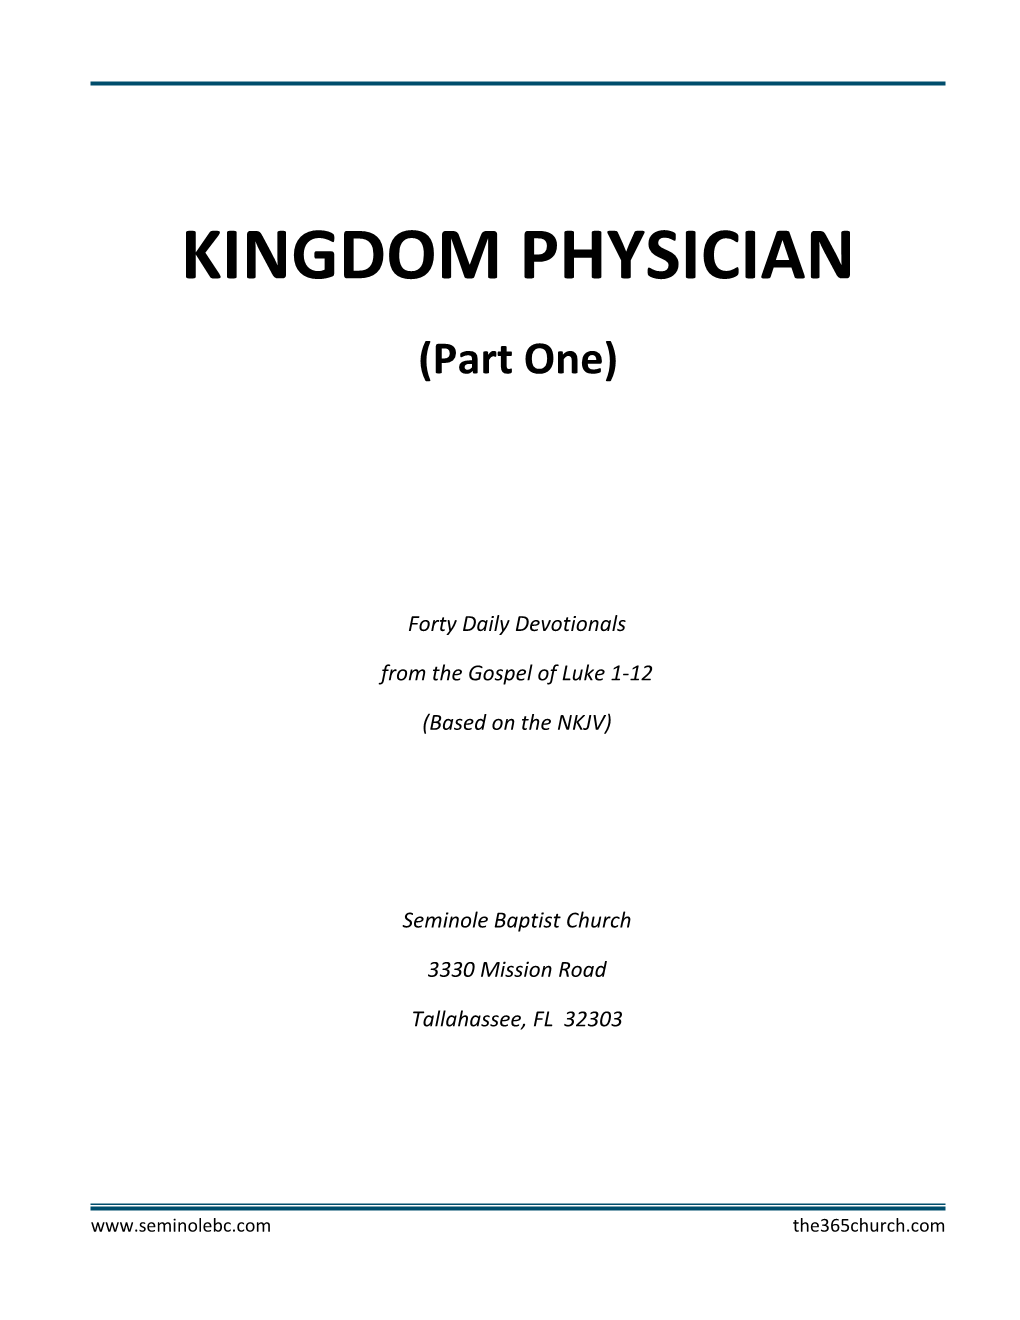 KINGDOM PHYSICIAN (Part One)